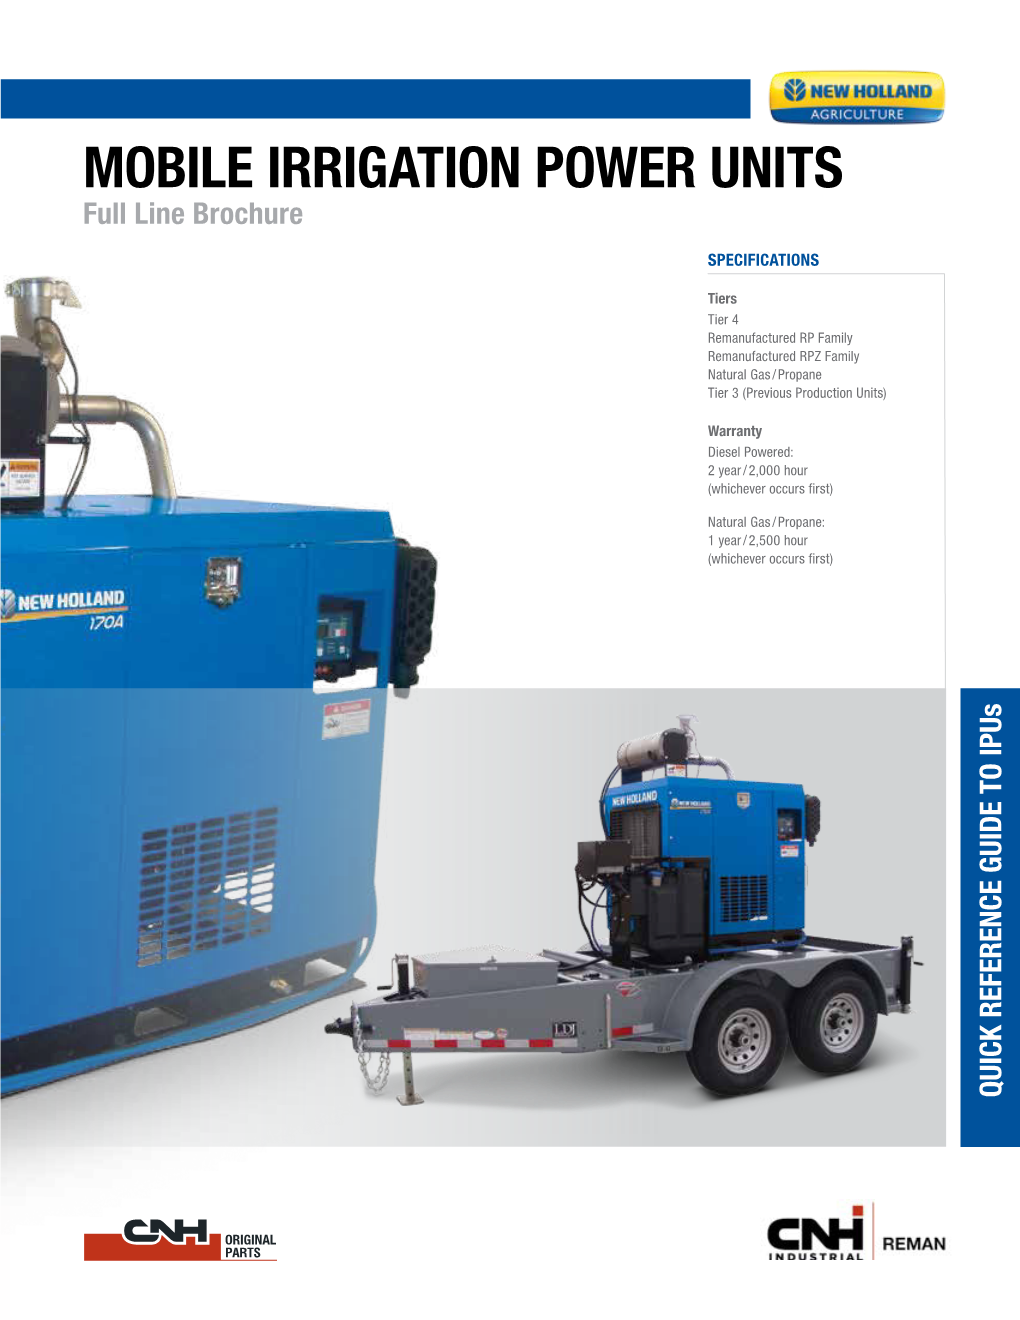 Mobile Irrigation Power Units (Ipus) to Deliver Optimum Power for Every Application